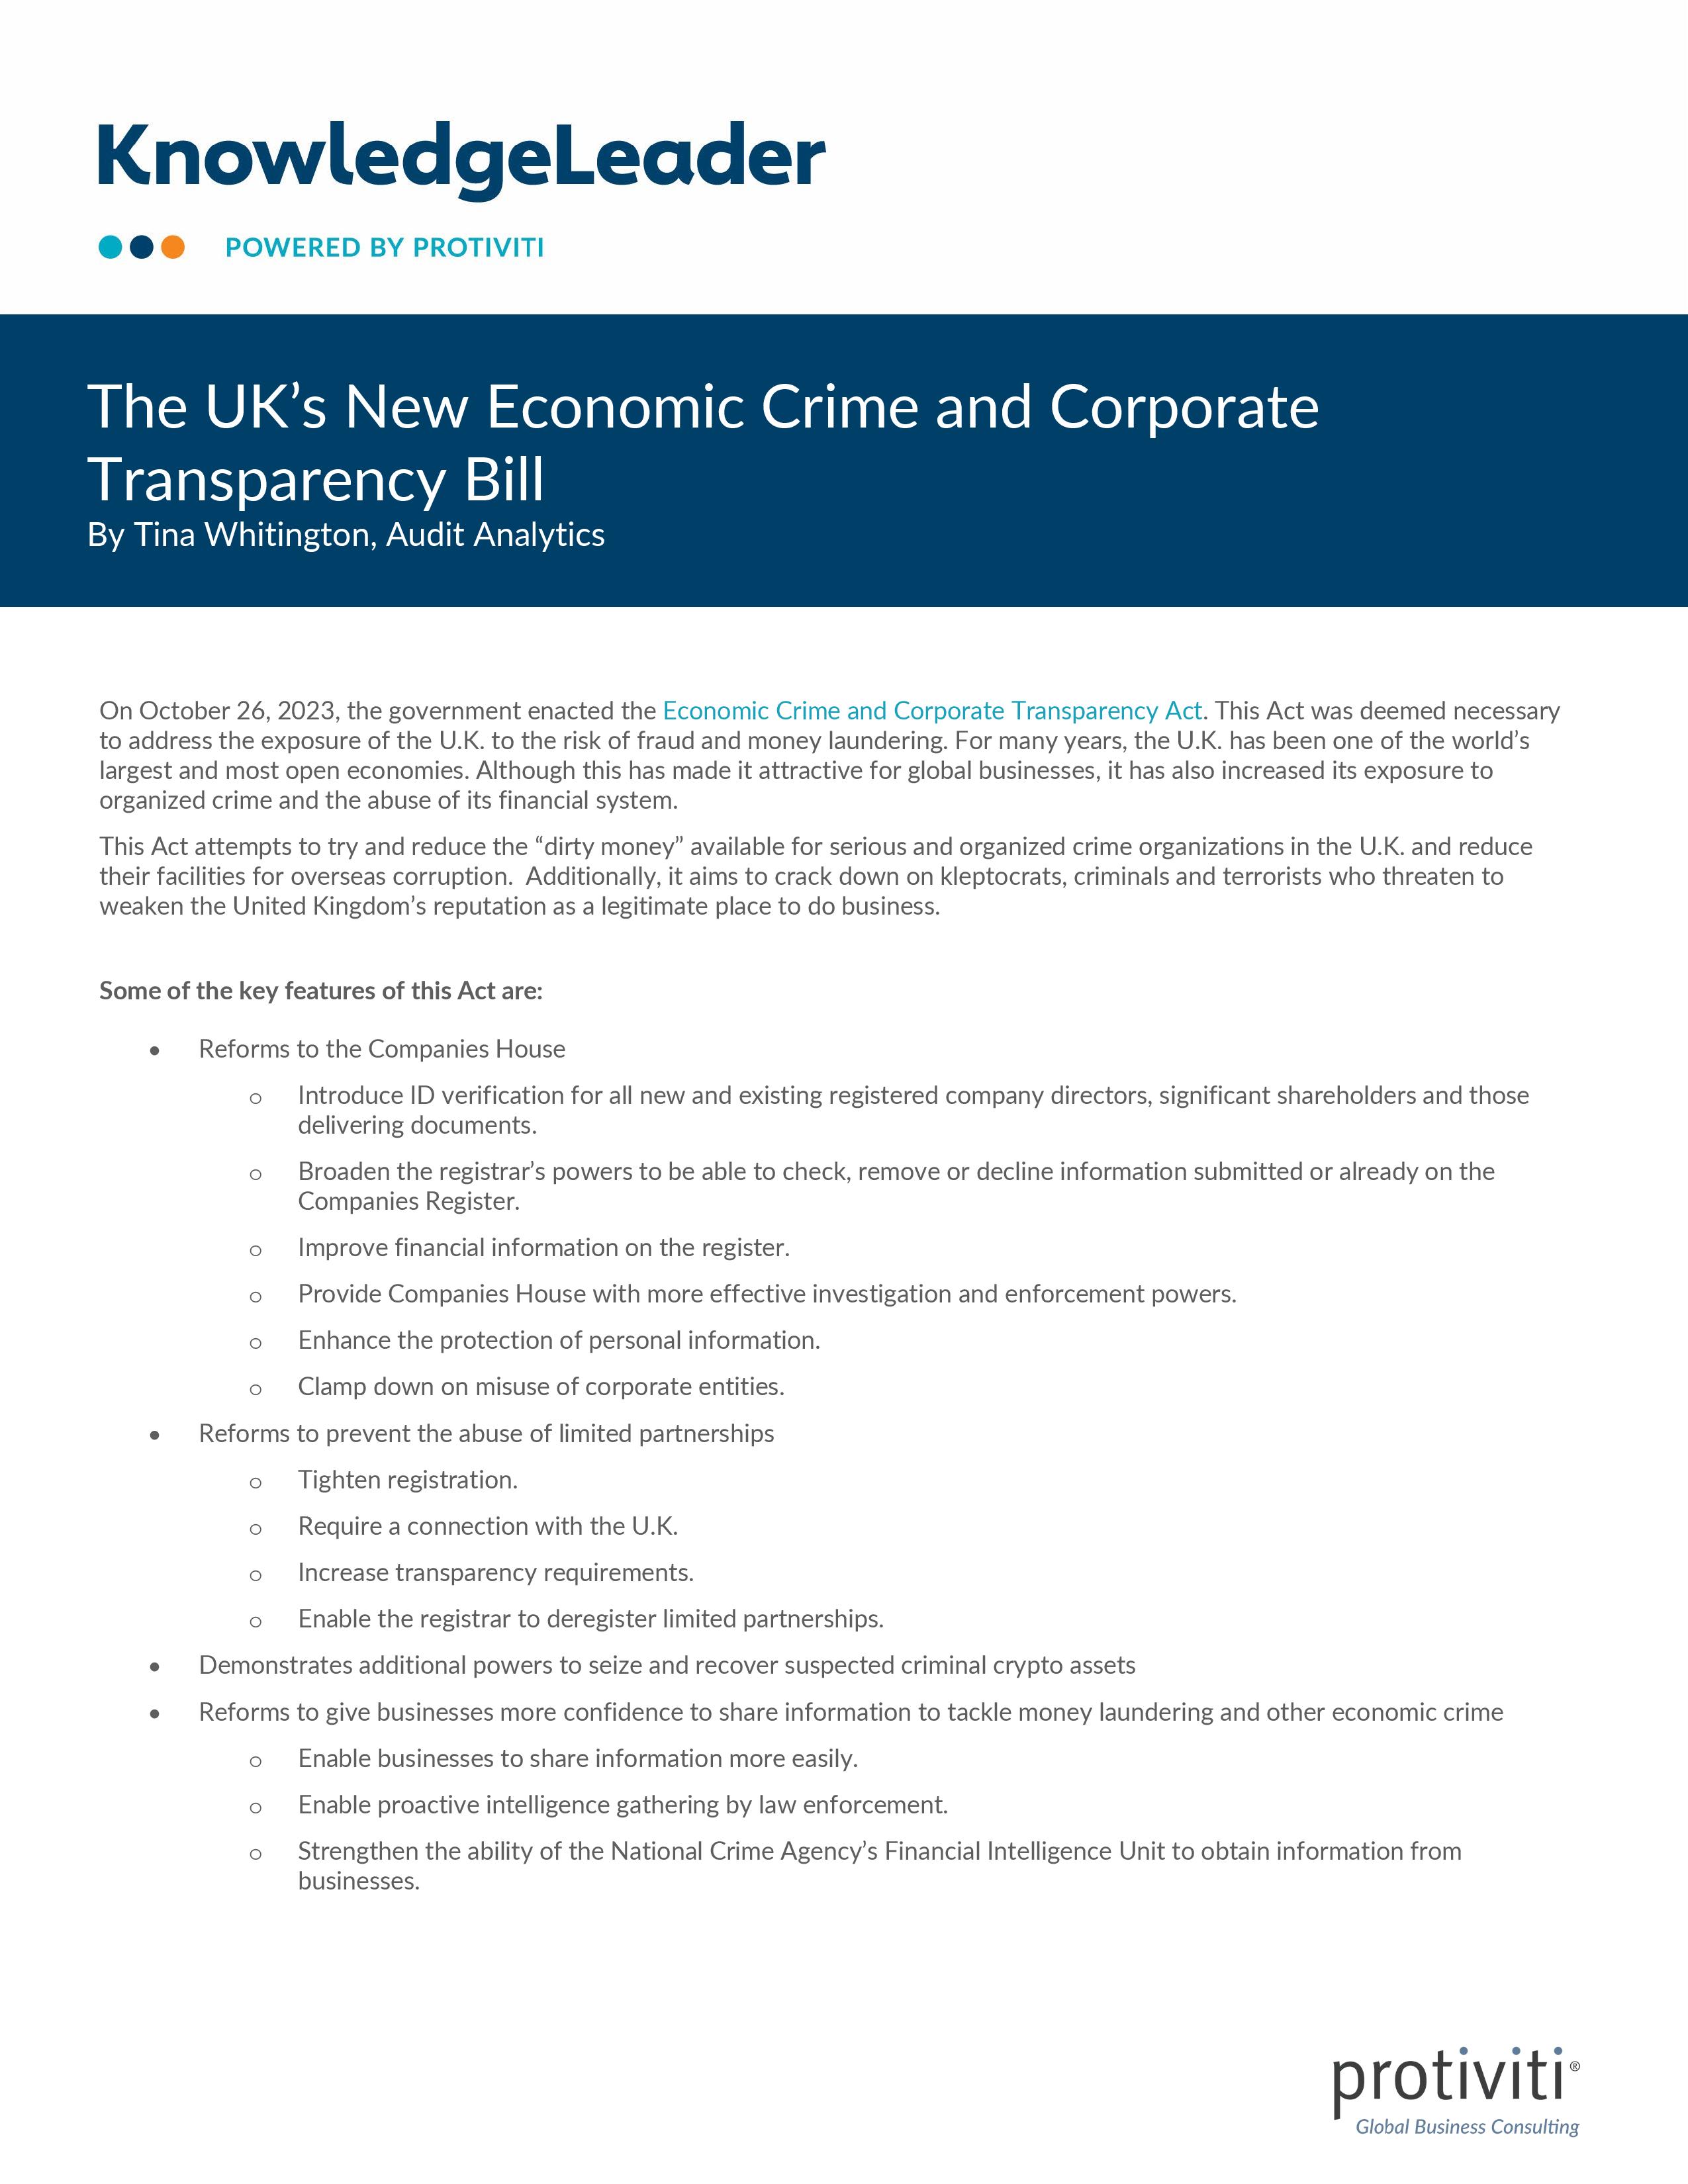 screenshot of the first page of The UK’s New Economic Crime and Corporate Transparency Bill